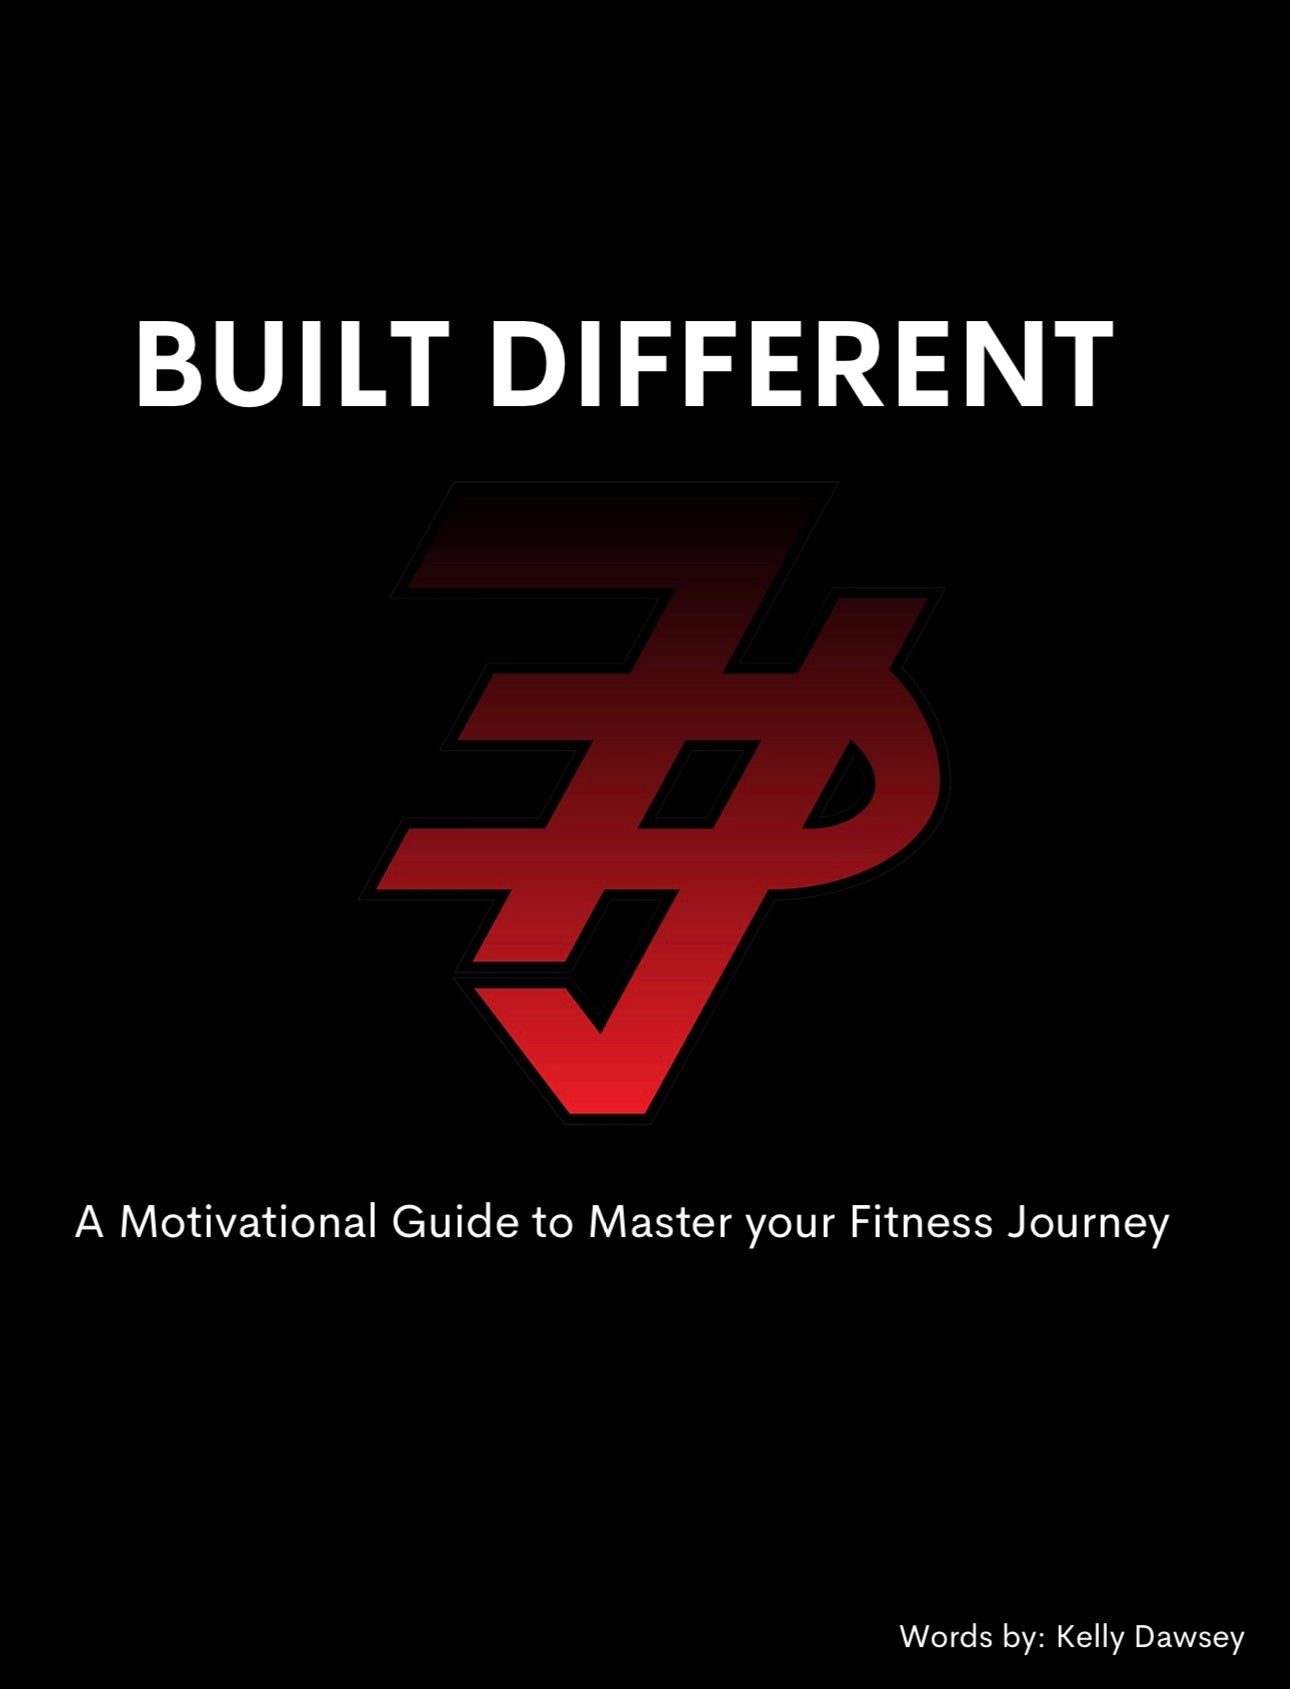 BUILT DIFFERENT: A Motivational Guide to Master your Fitness